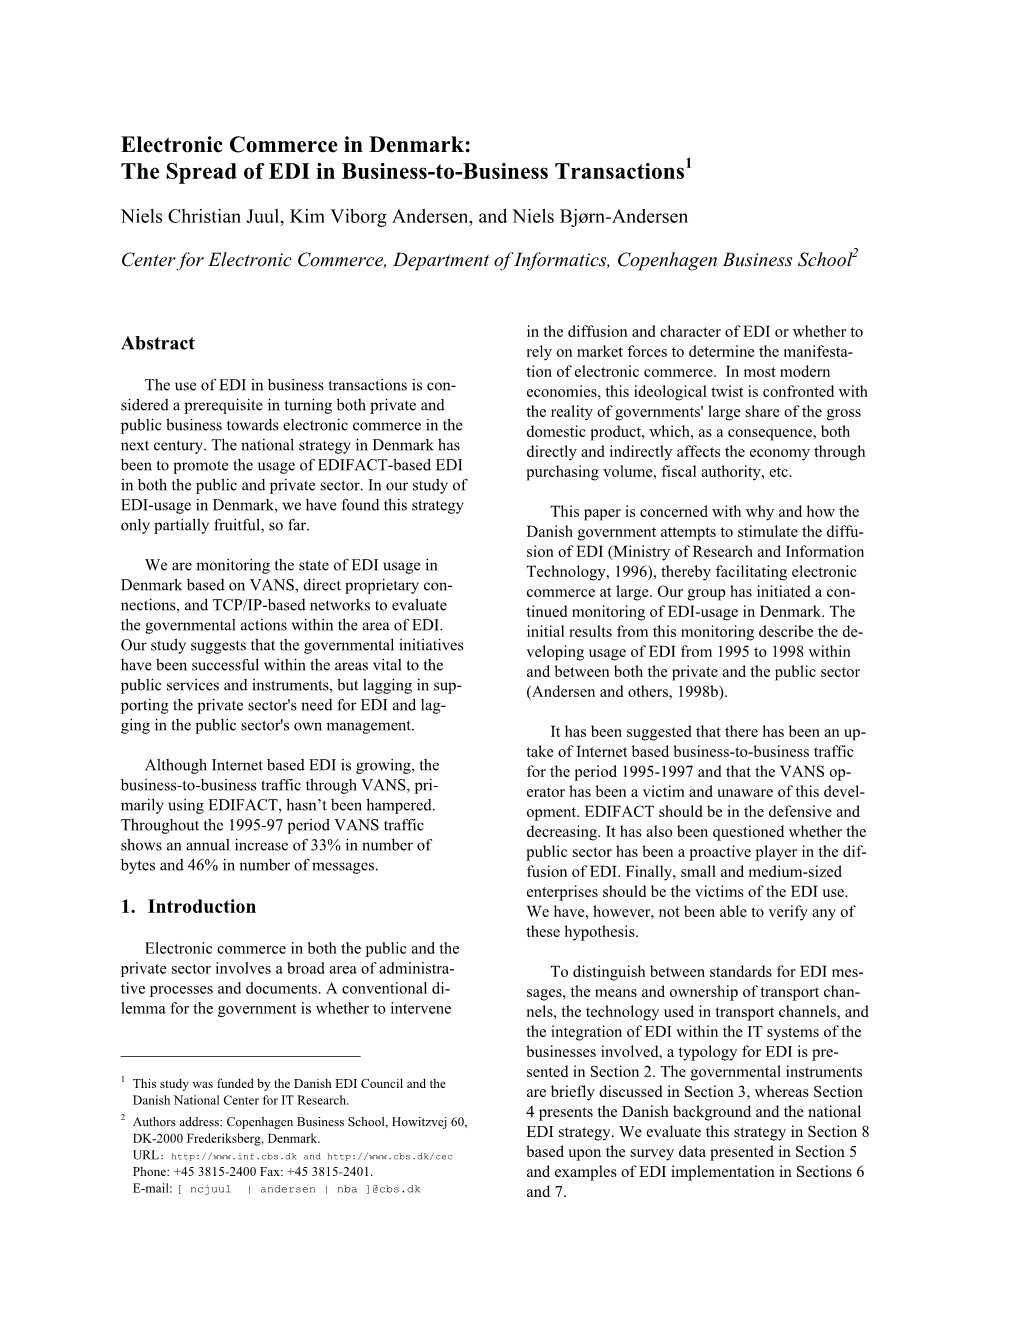 Electronic Commerce in Denmark: the Spread of EDI in Business-To-Business Transactions1